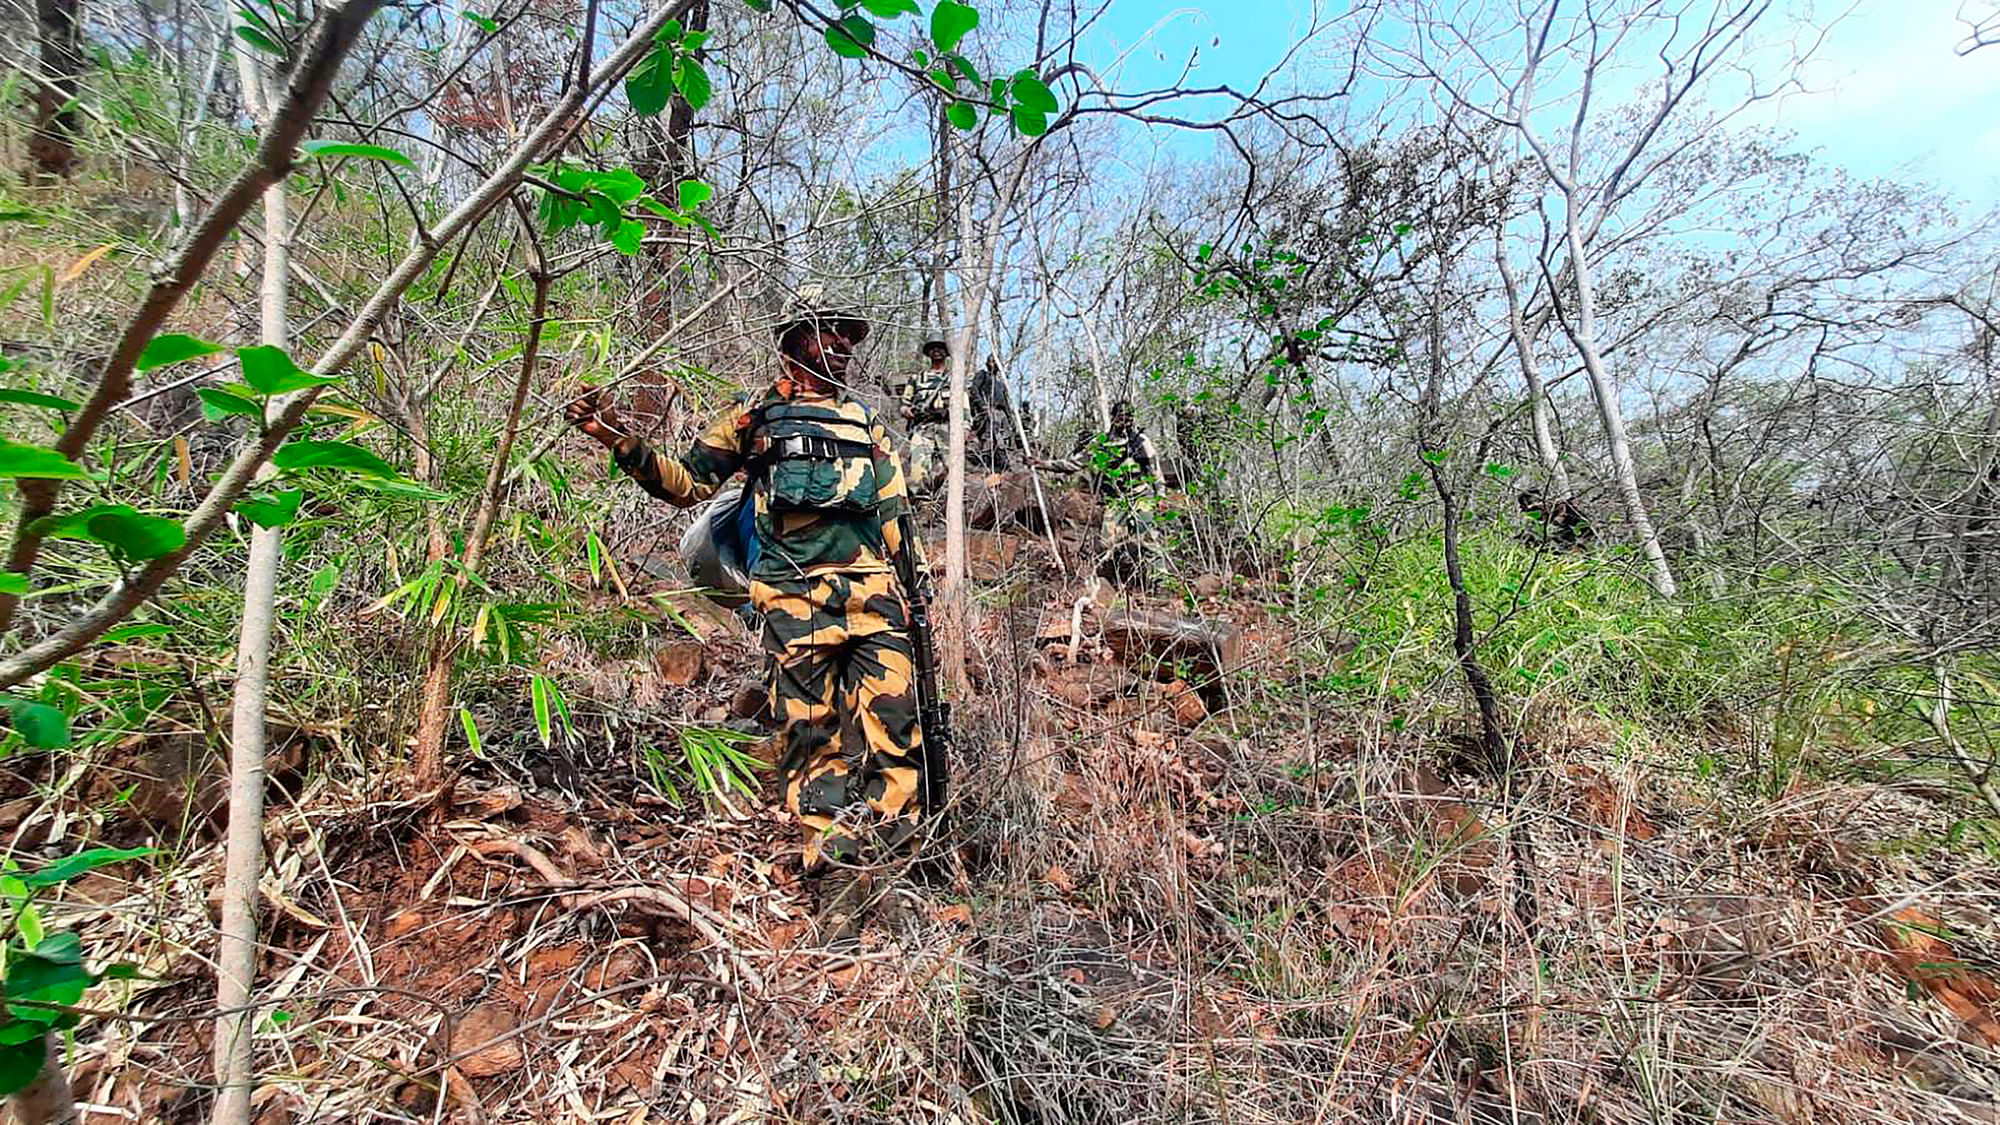 <div class="paragraphs"><p>Having learnt the lesson from the ambush by the Naxals in the Jheeram Valley area just before the 2013 elections to the Chhattisgarh Assembly, in which the Congress lost its entire leadership, and in view of the upcoming Lok Sabha elections, the security forces have increased their operations against the Naxals in respective areas of responsibilities.</p></div>